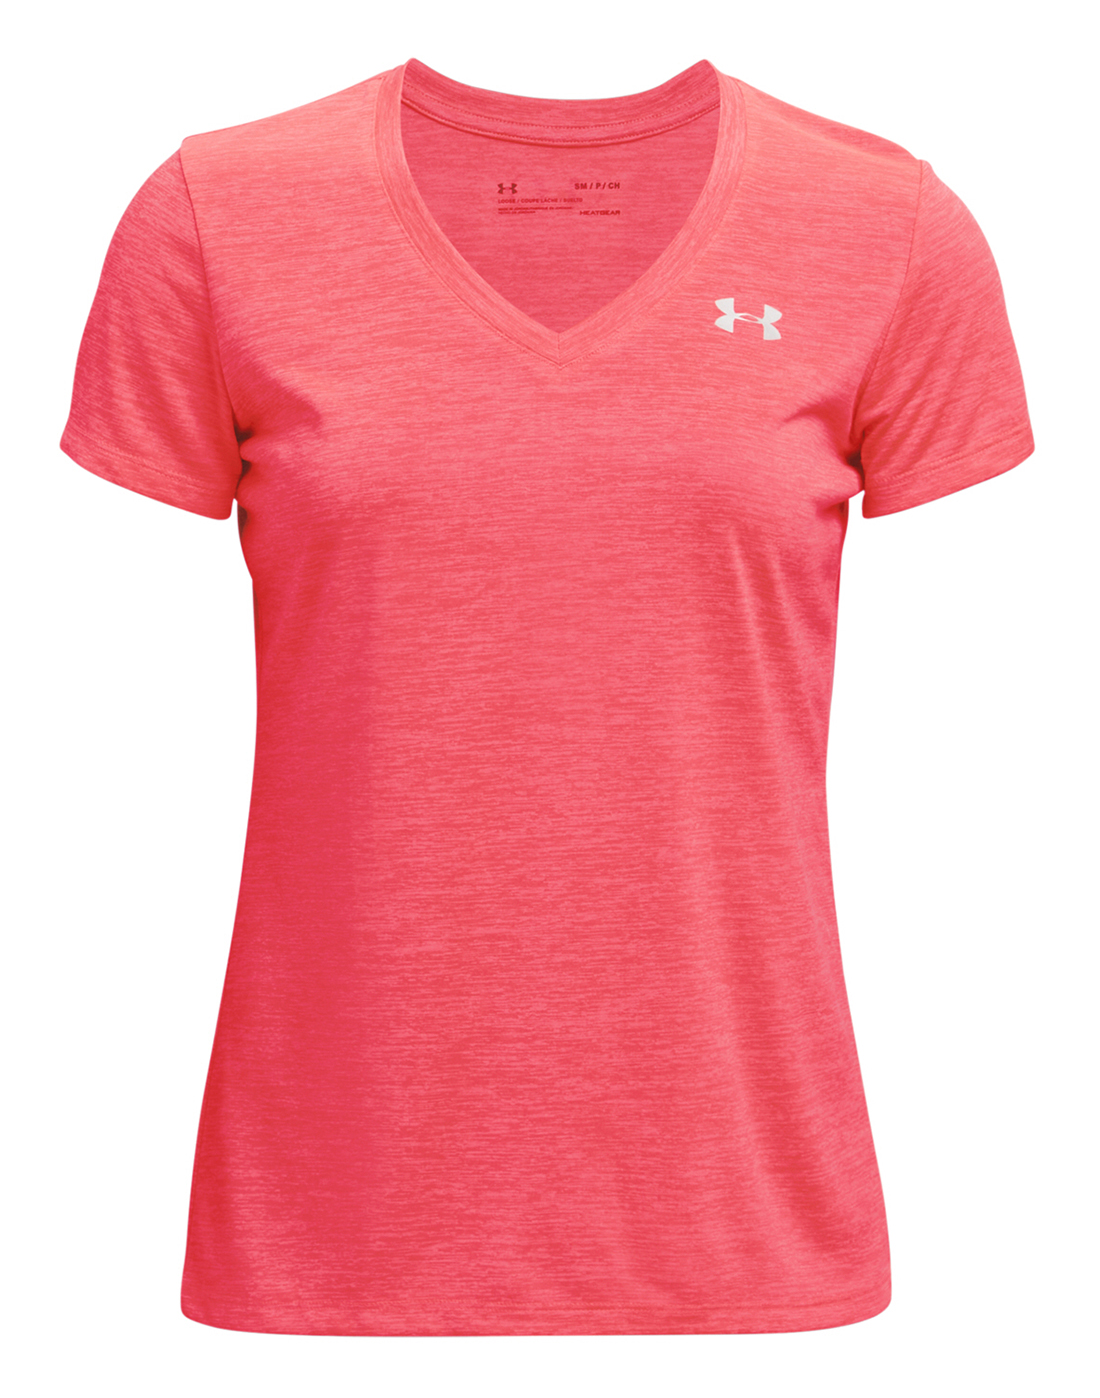 Under Armour Womens Tech Twist T-shirt - Red | Life Style Sports IE